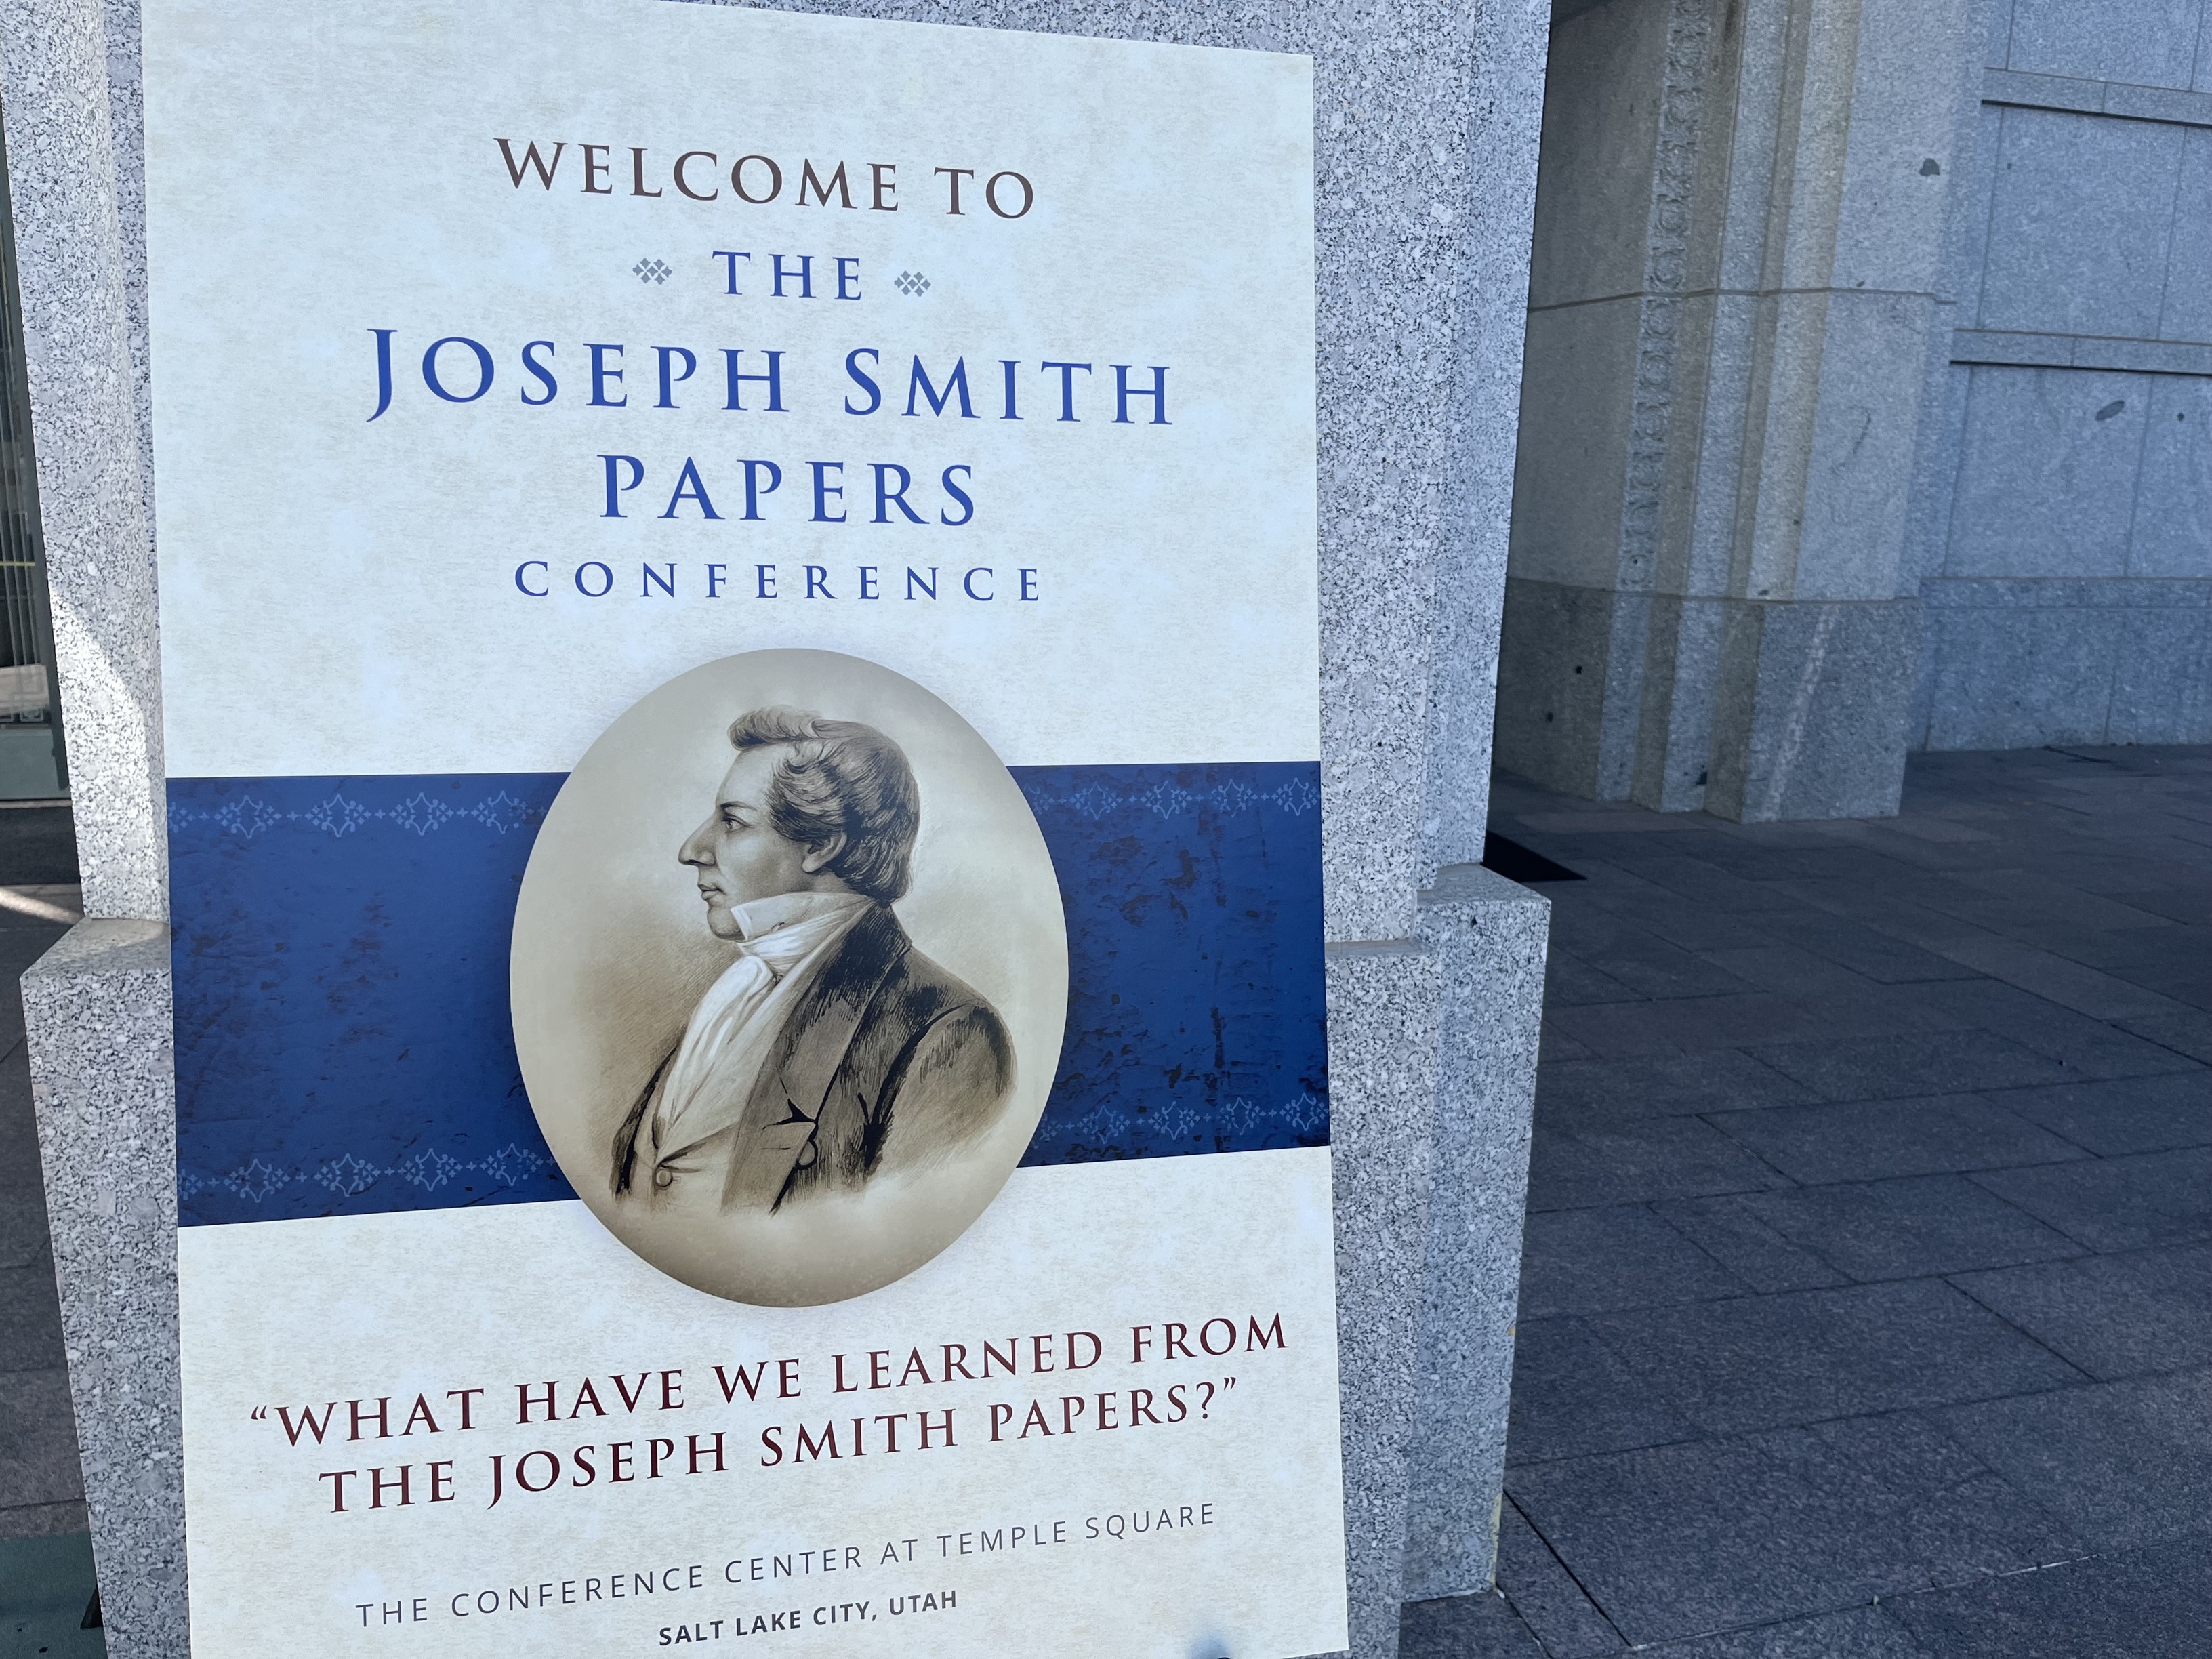 Welcome poster for the Joseph Smith Papers conference outside the Conference Center